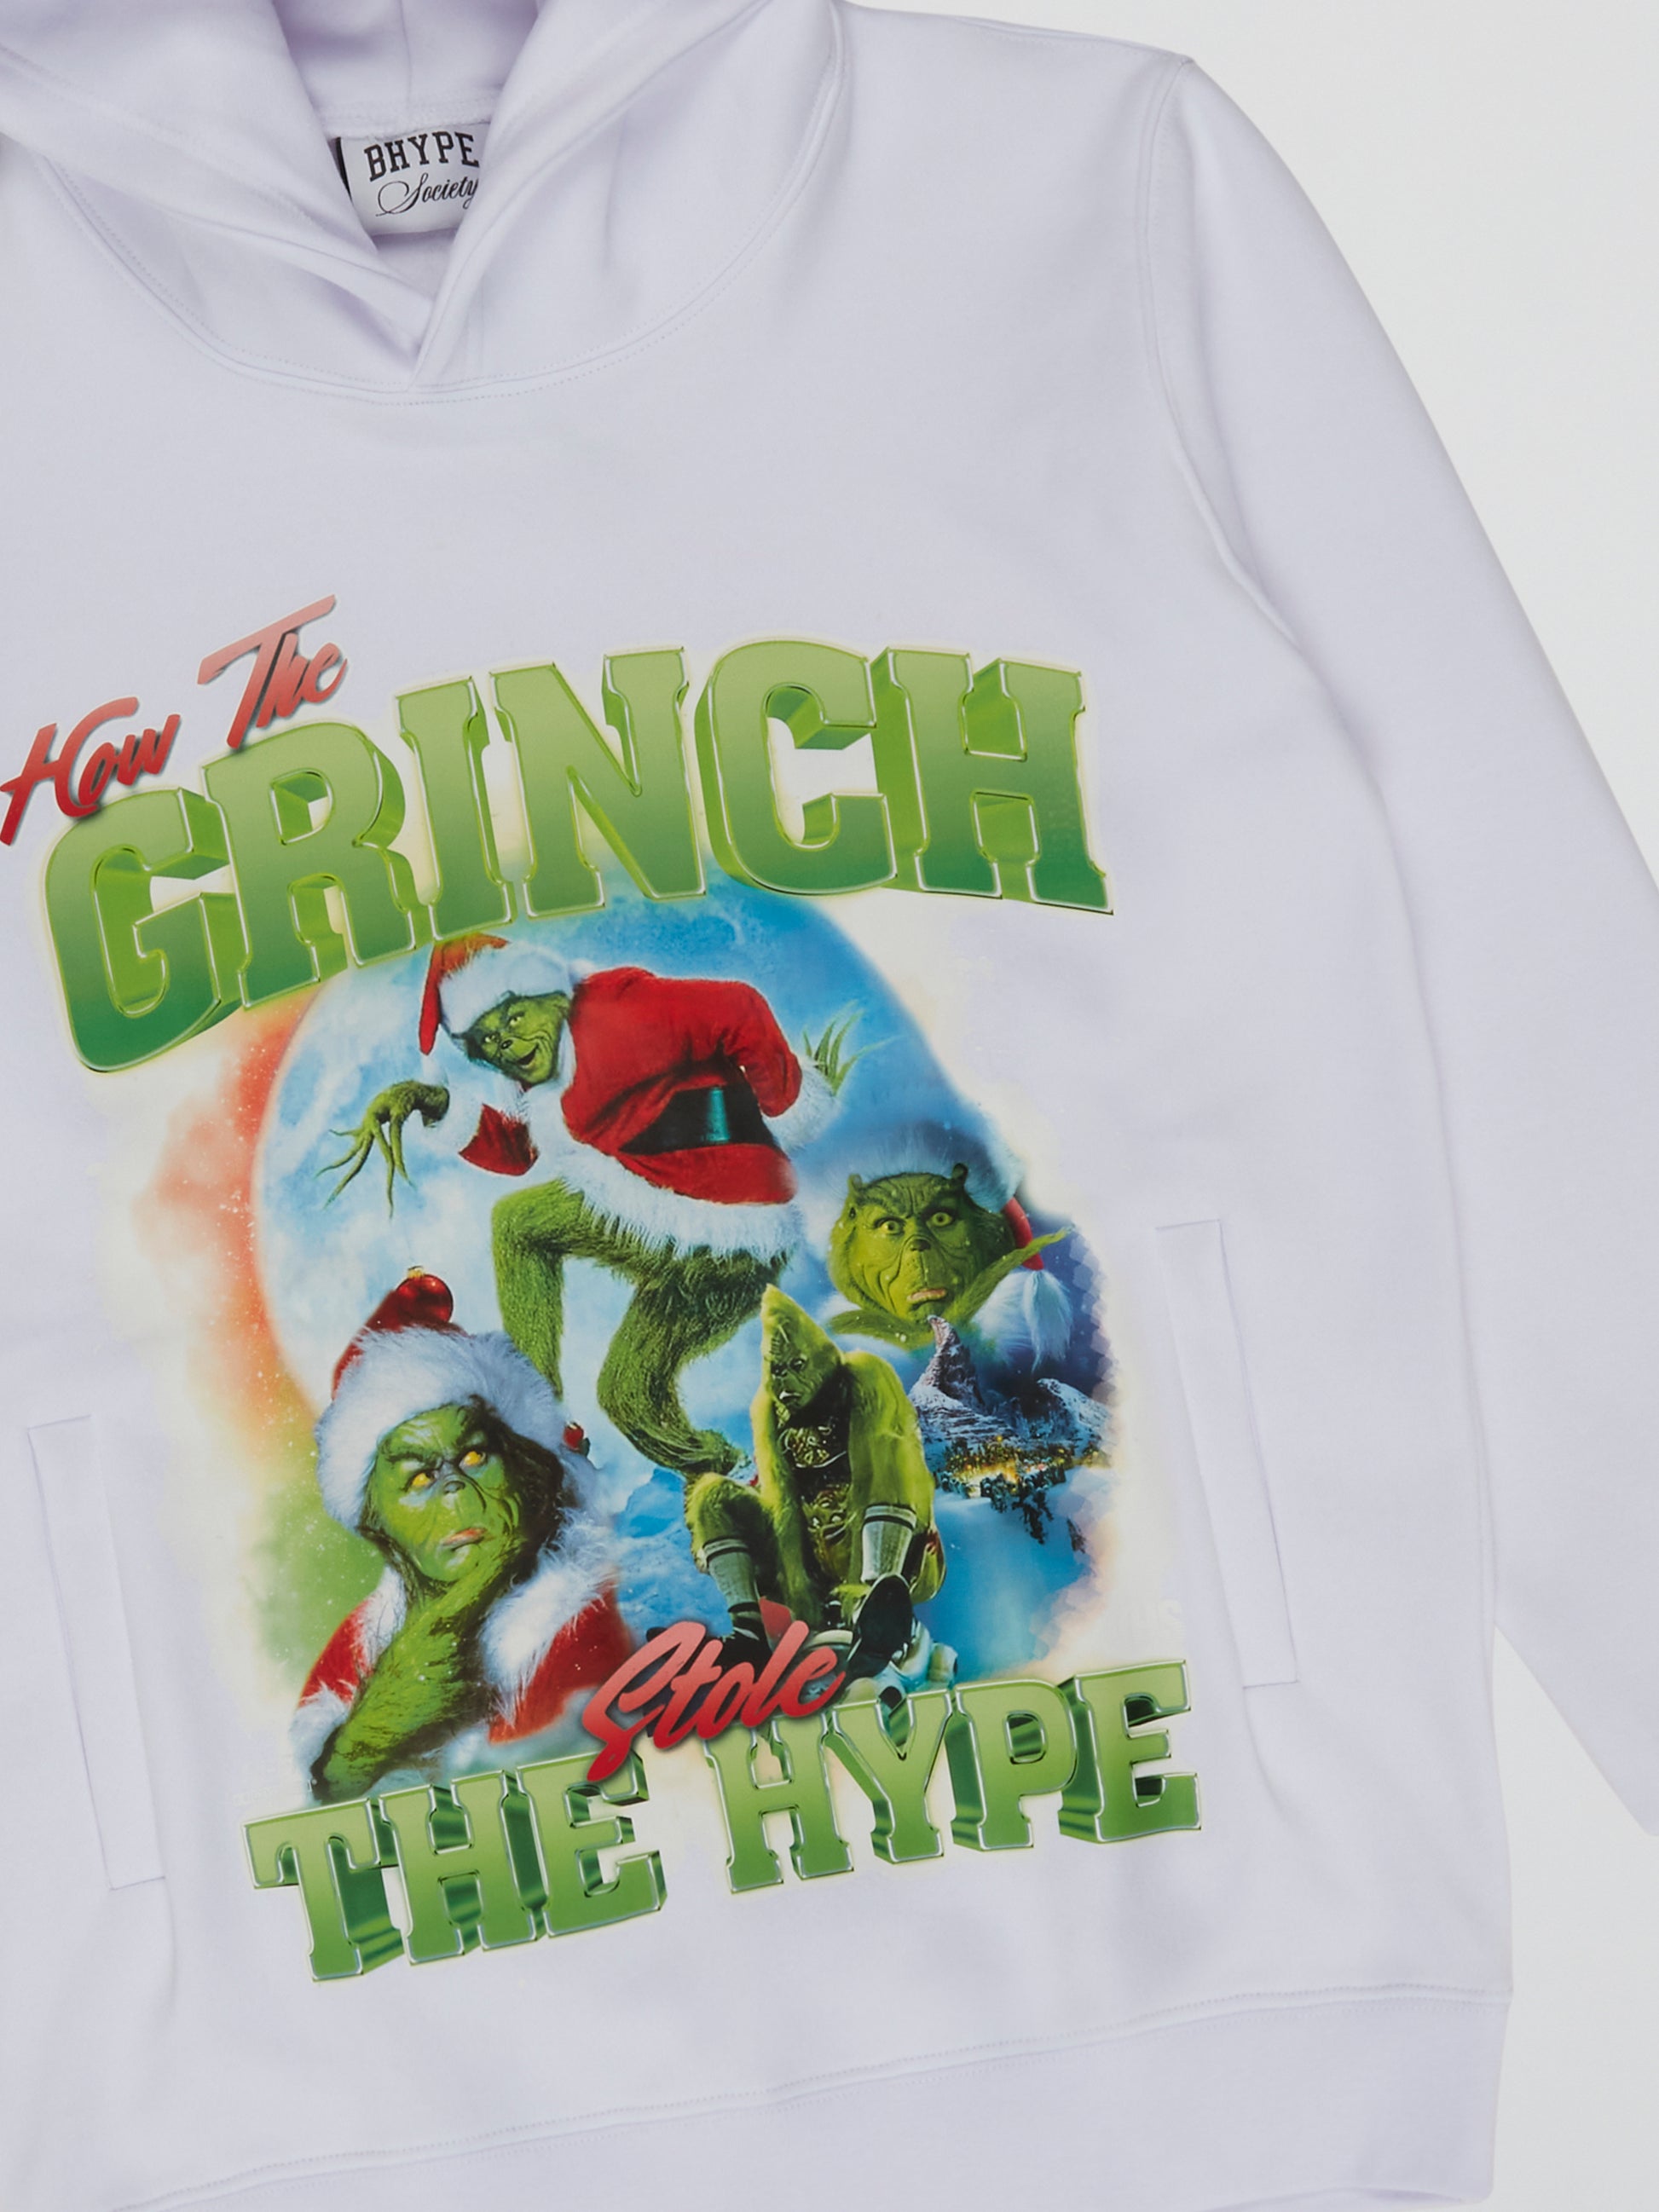 BHYPE SOCIETY x THE GRINCH WHITE HOODIE